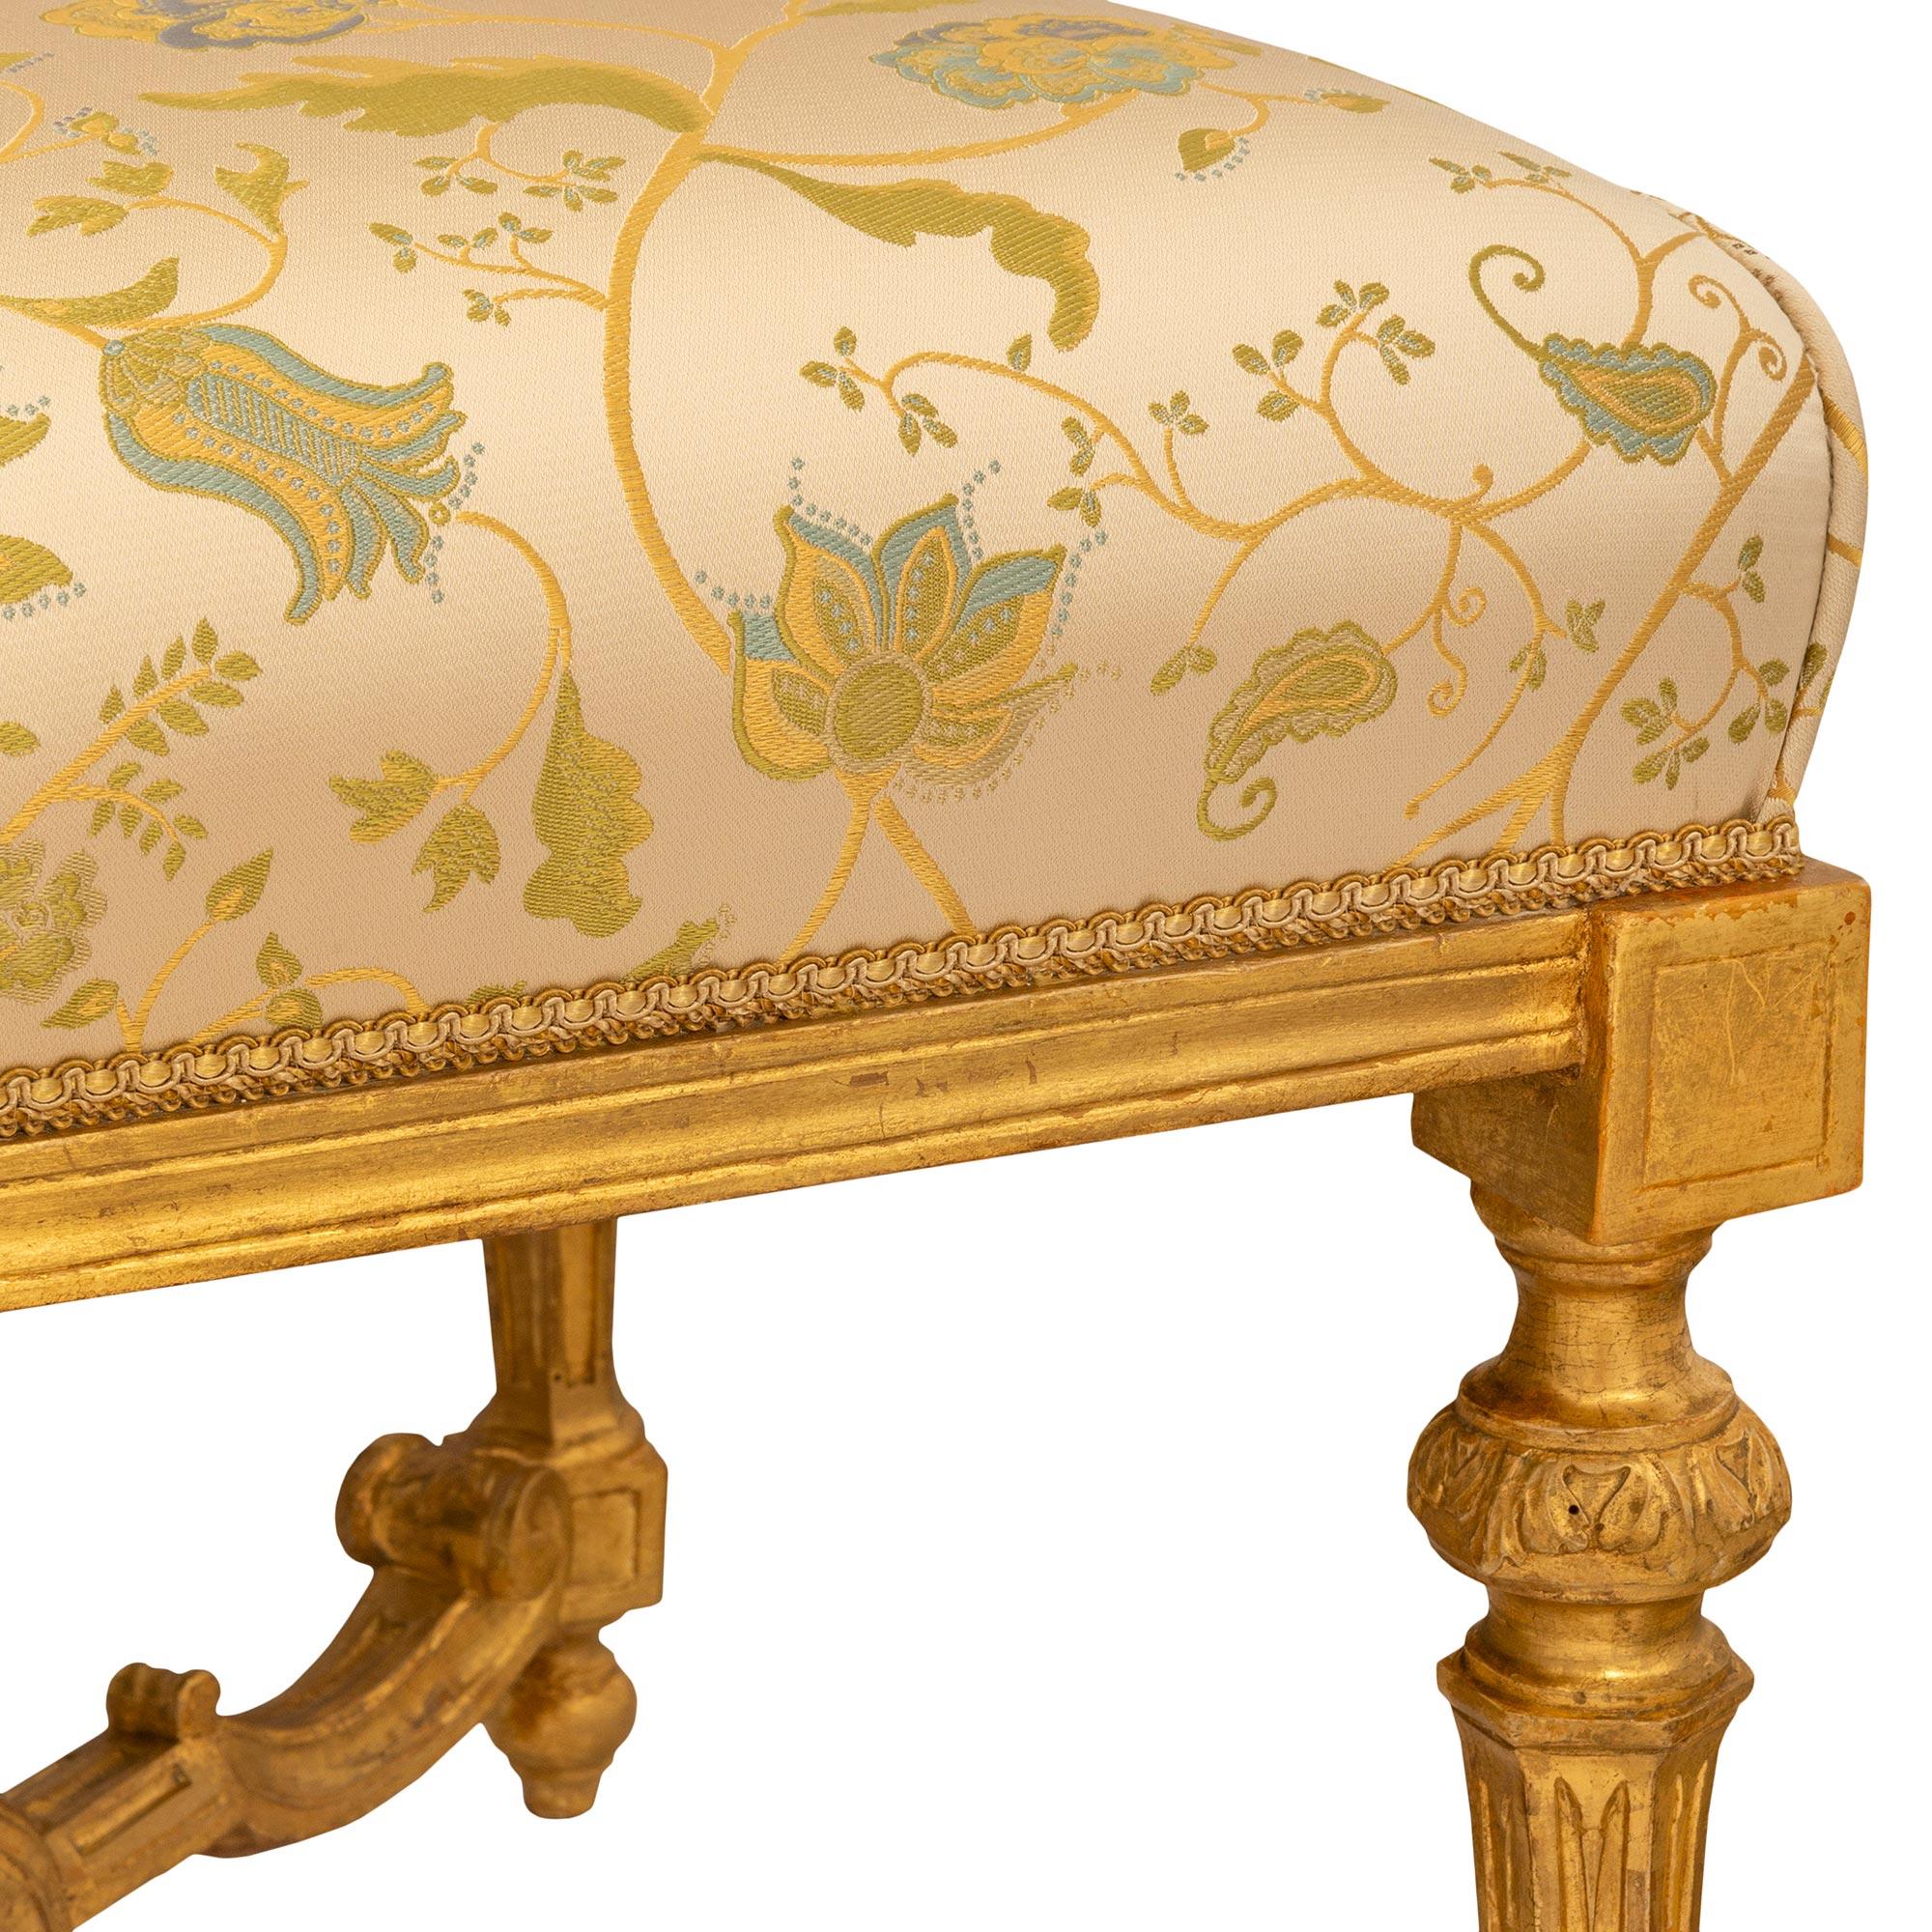 Italian Early 18th Century Louis XIV Period Giltwood Bench For Sale 2